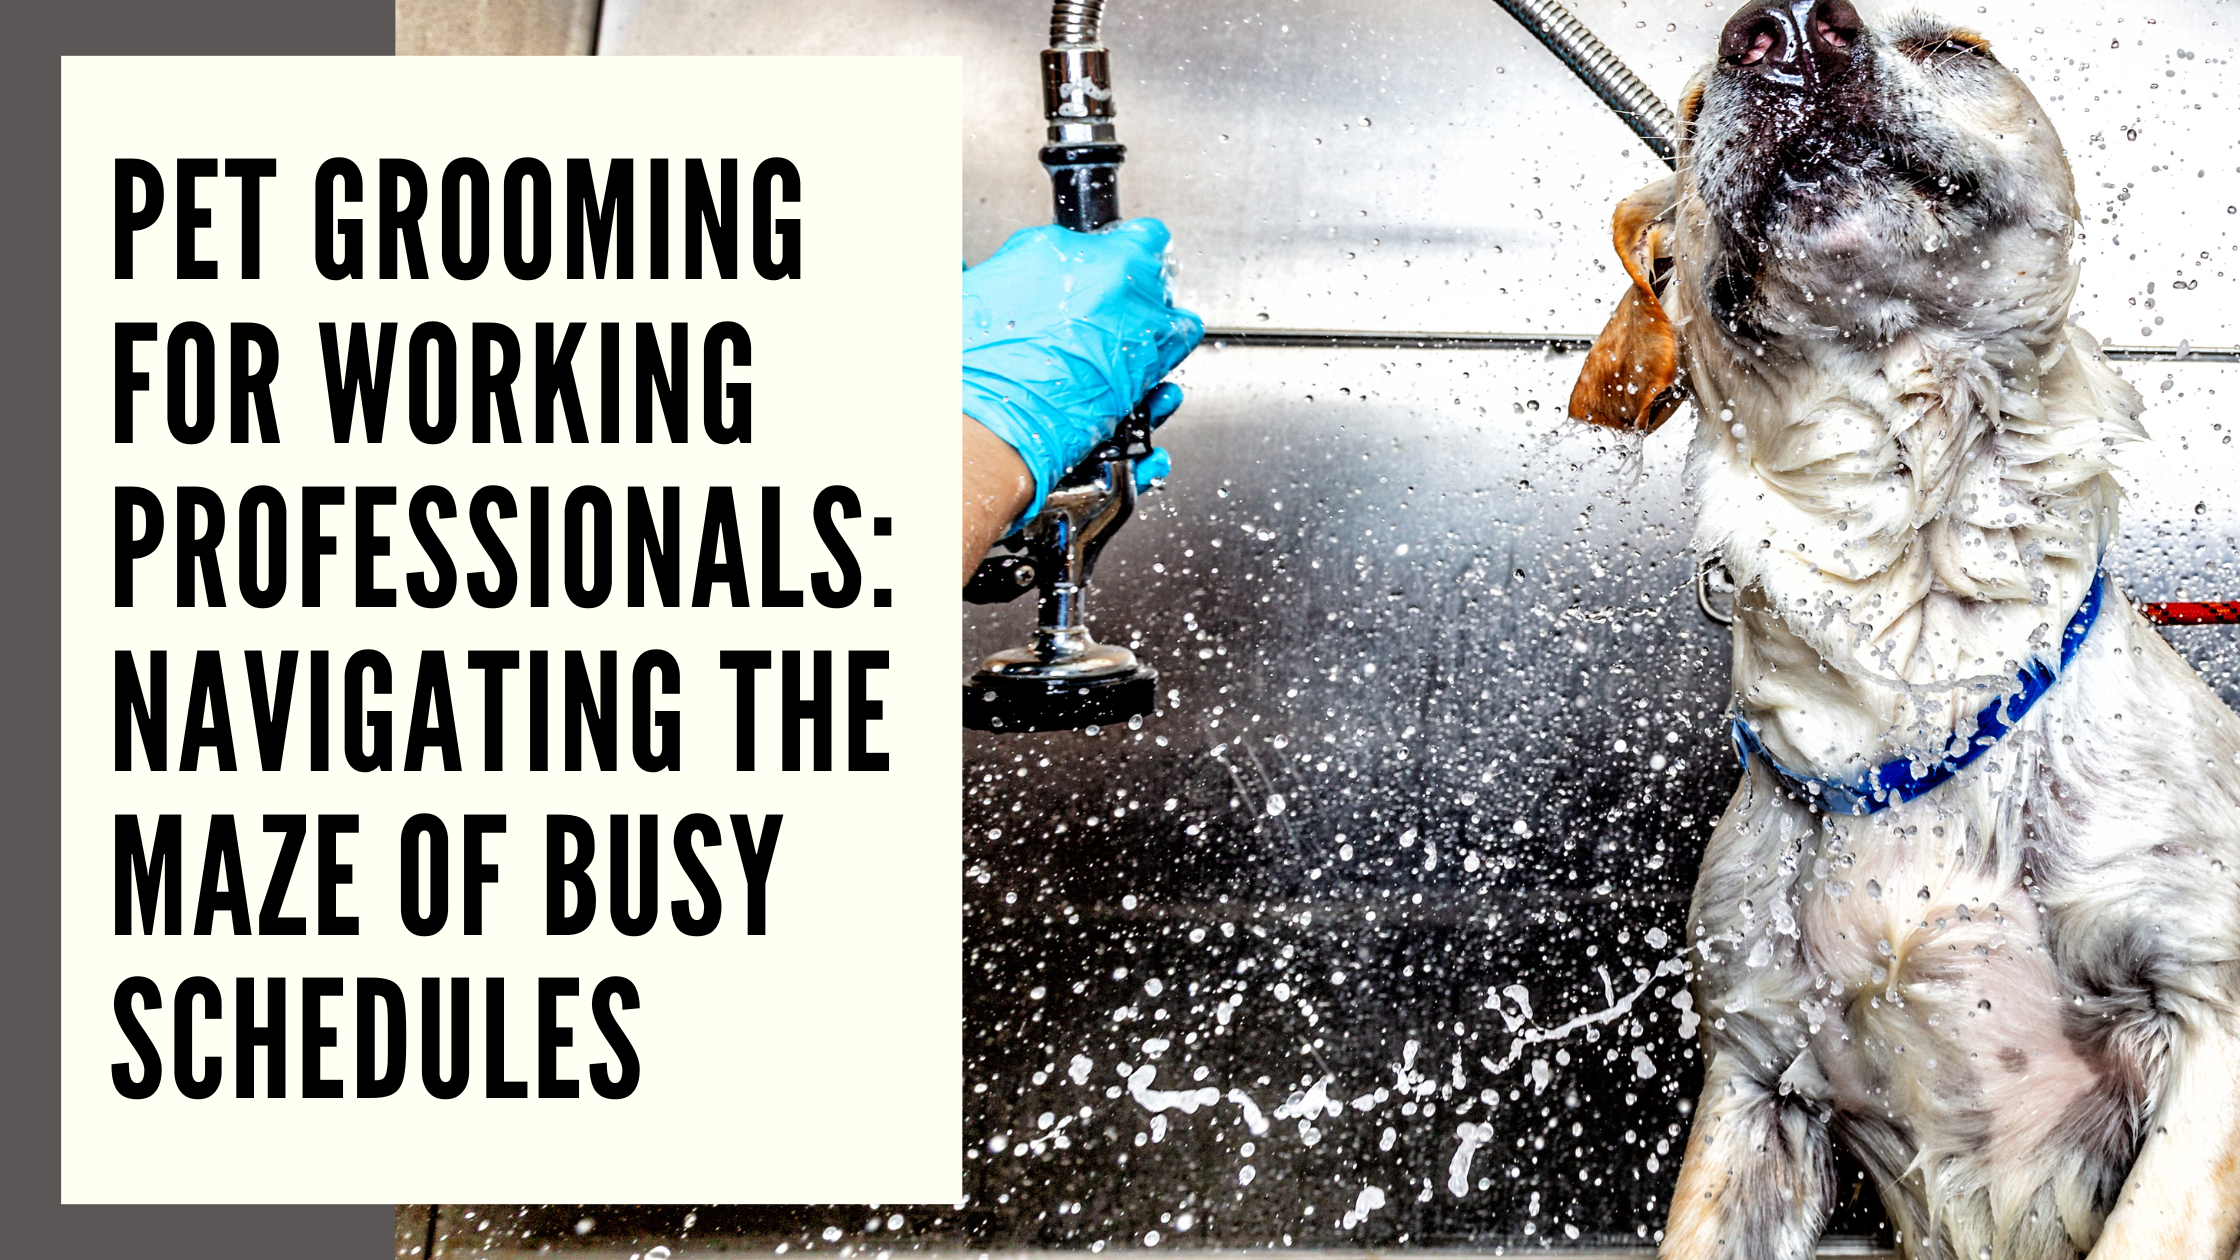 Pet Grooming for Working Professionals Navigating the Maze of Busy Schedules